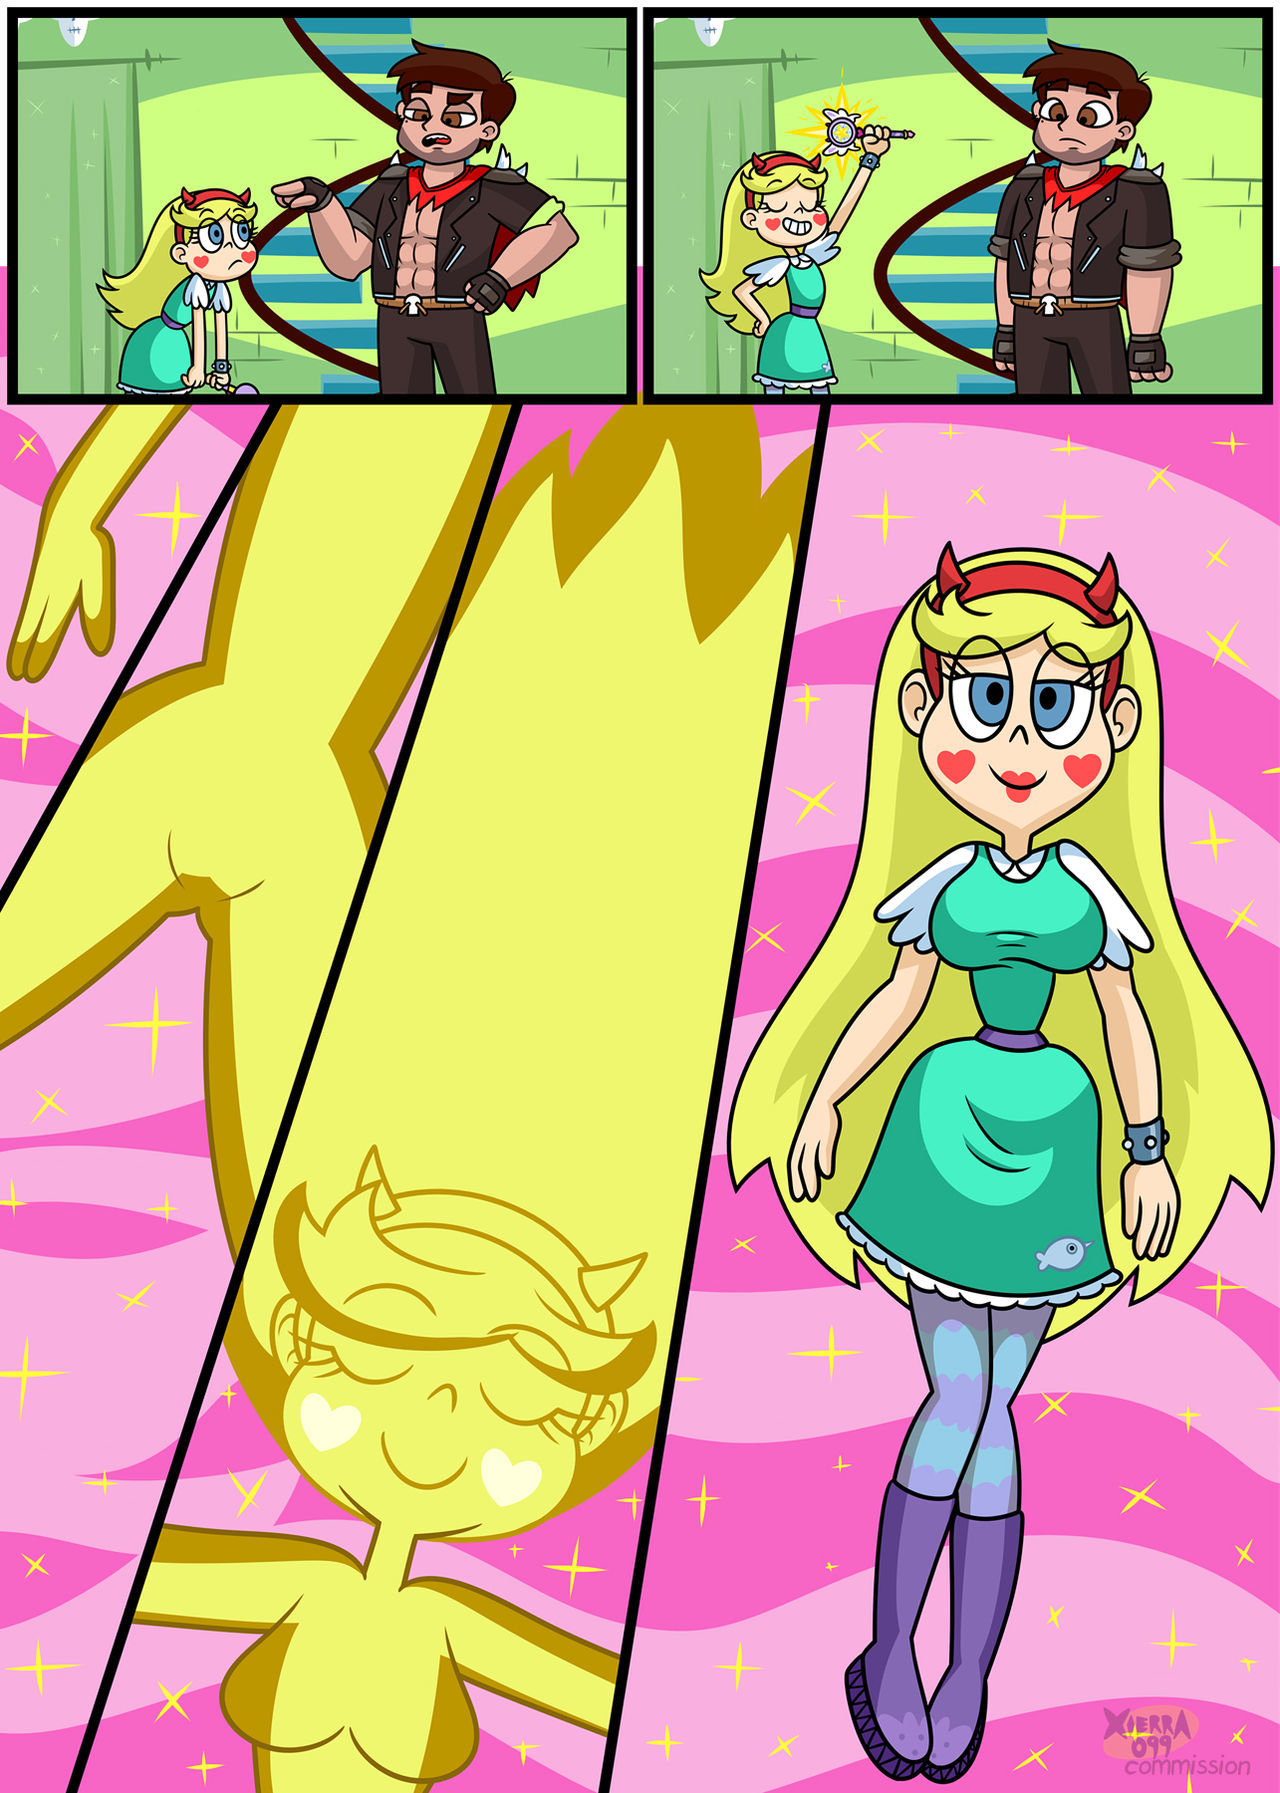 Future With Benefits (Star Vs the Forces of Evil) by Xierra099 page 4